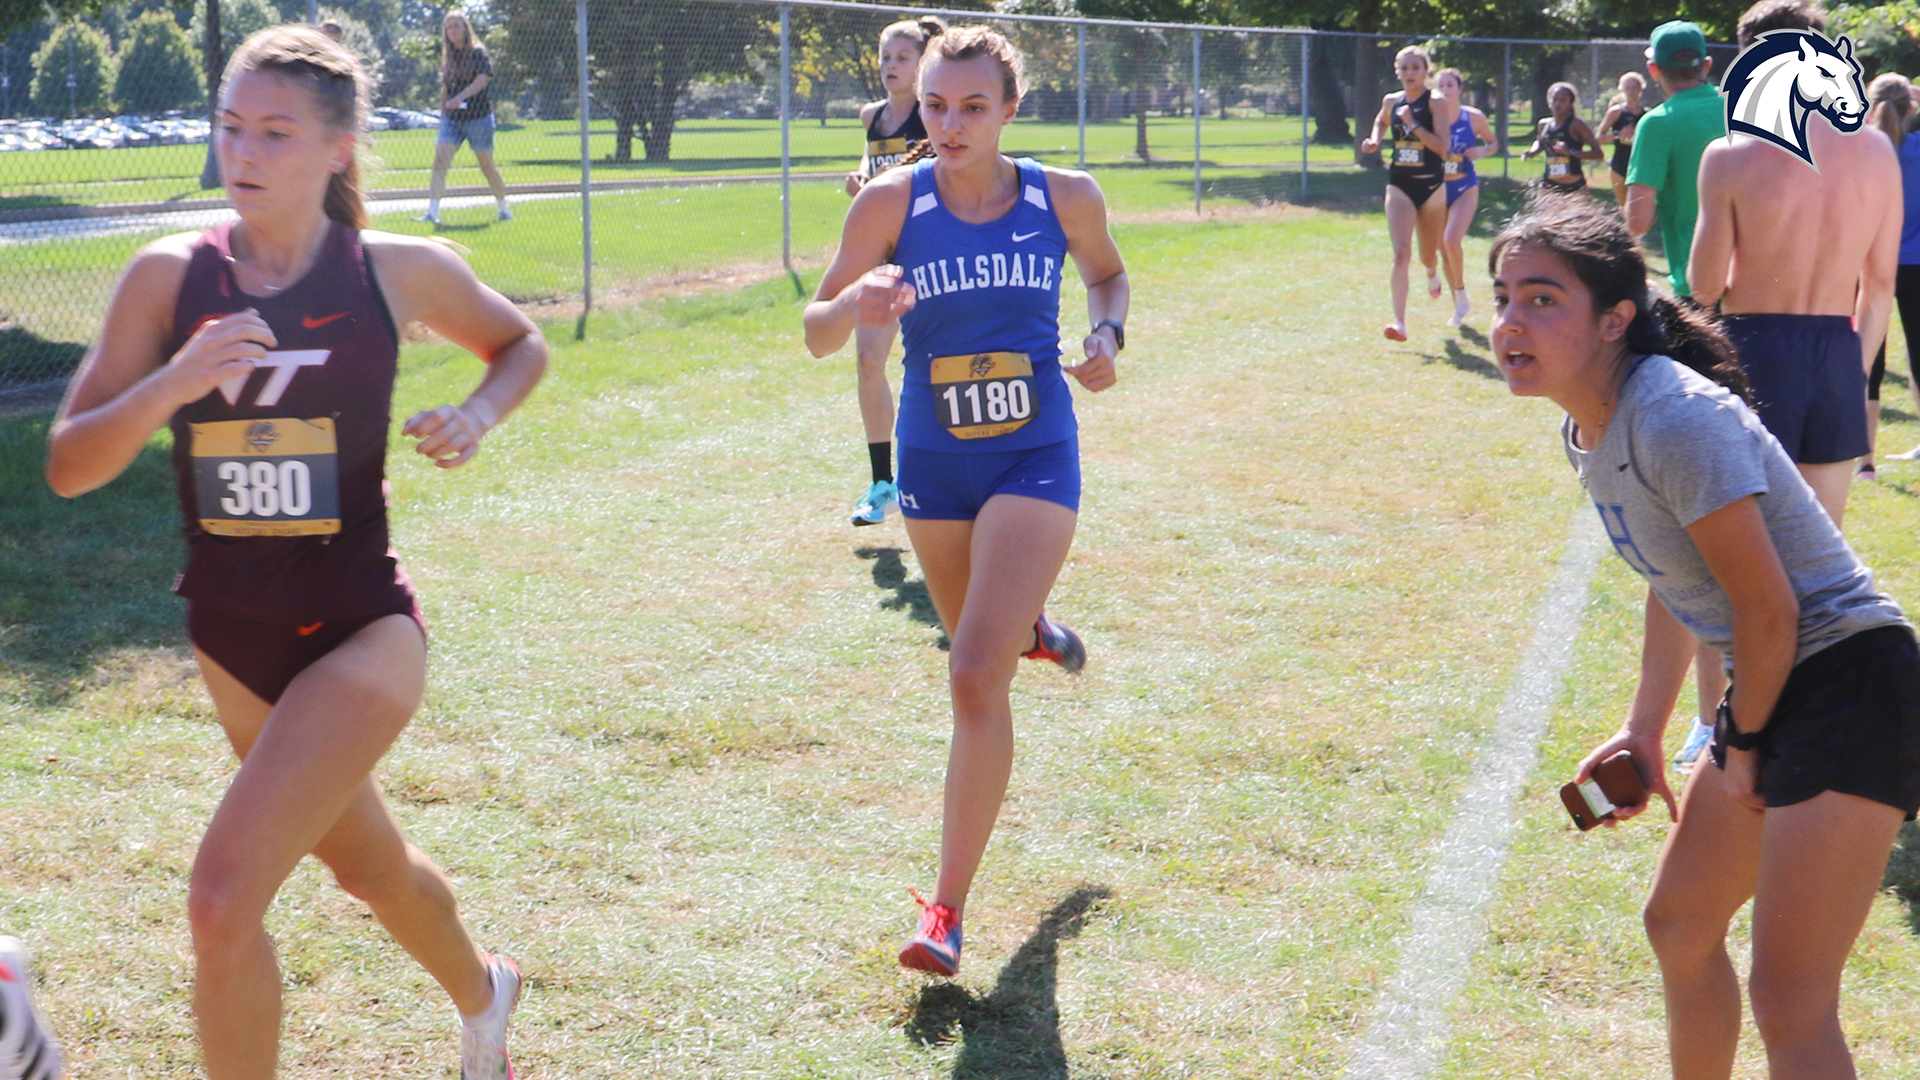 Chargers' Liz Wamsley named G-MAC Women's Cross Country Athlete of the Week (Aug. 29-Sept. 5)